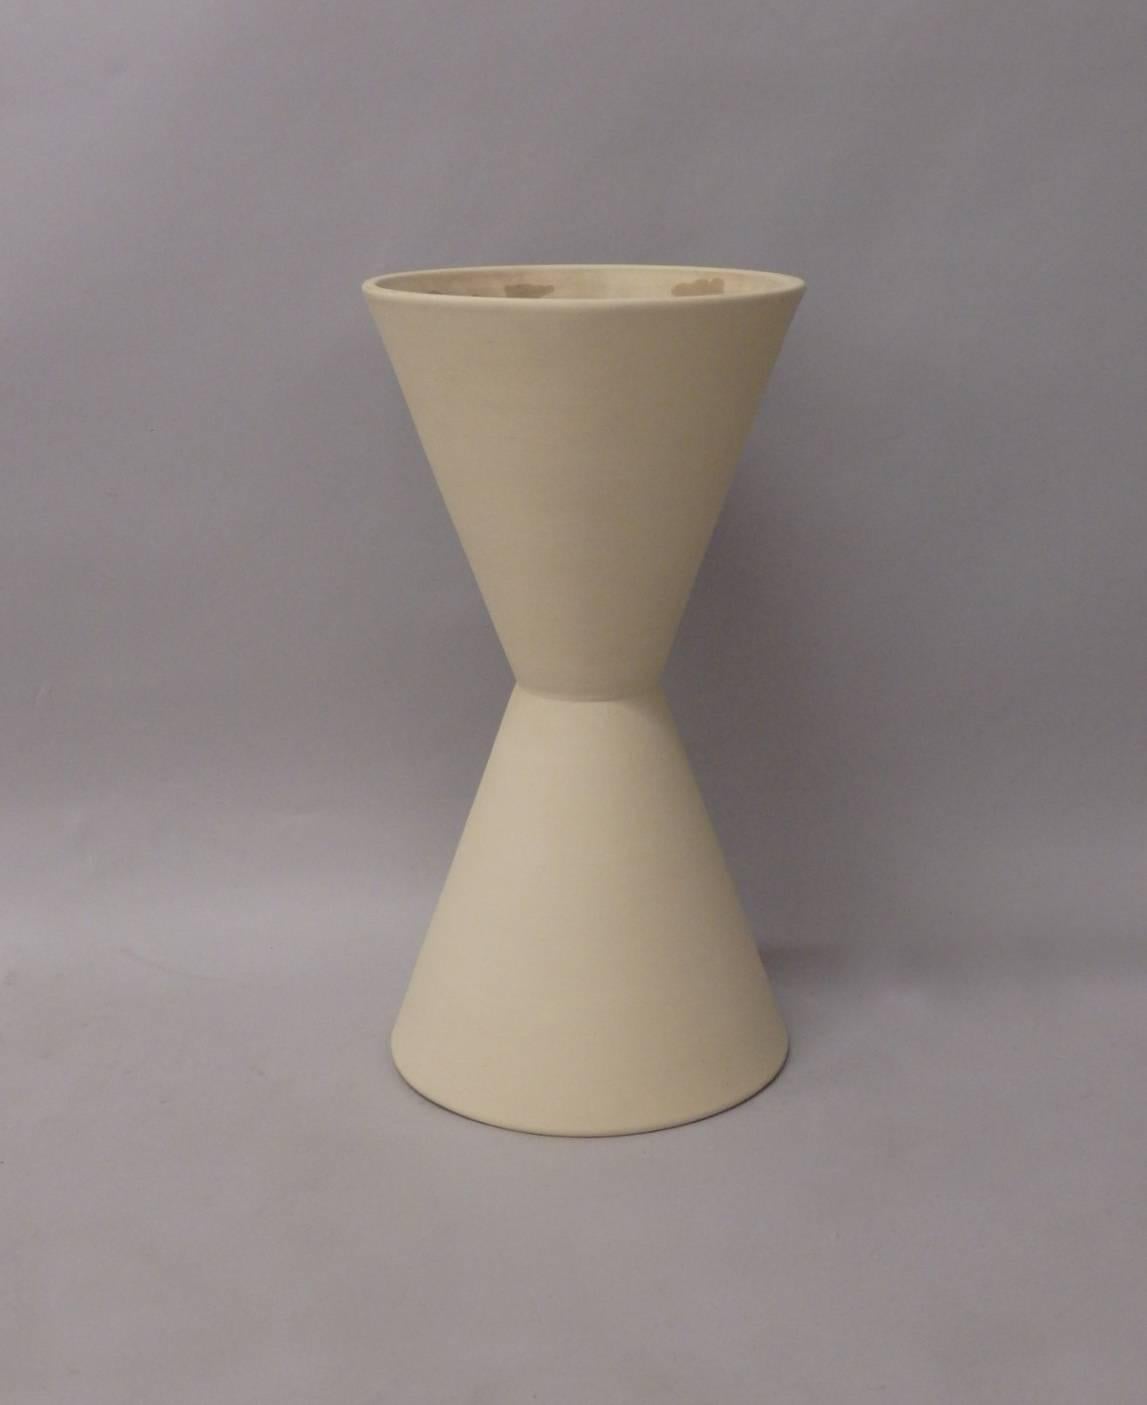 Early Lagardo Tackett for Architectural Pottery double cone planter pot. Pot is in bisque finish and clearly stamped Architectural Pottery.